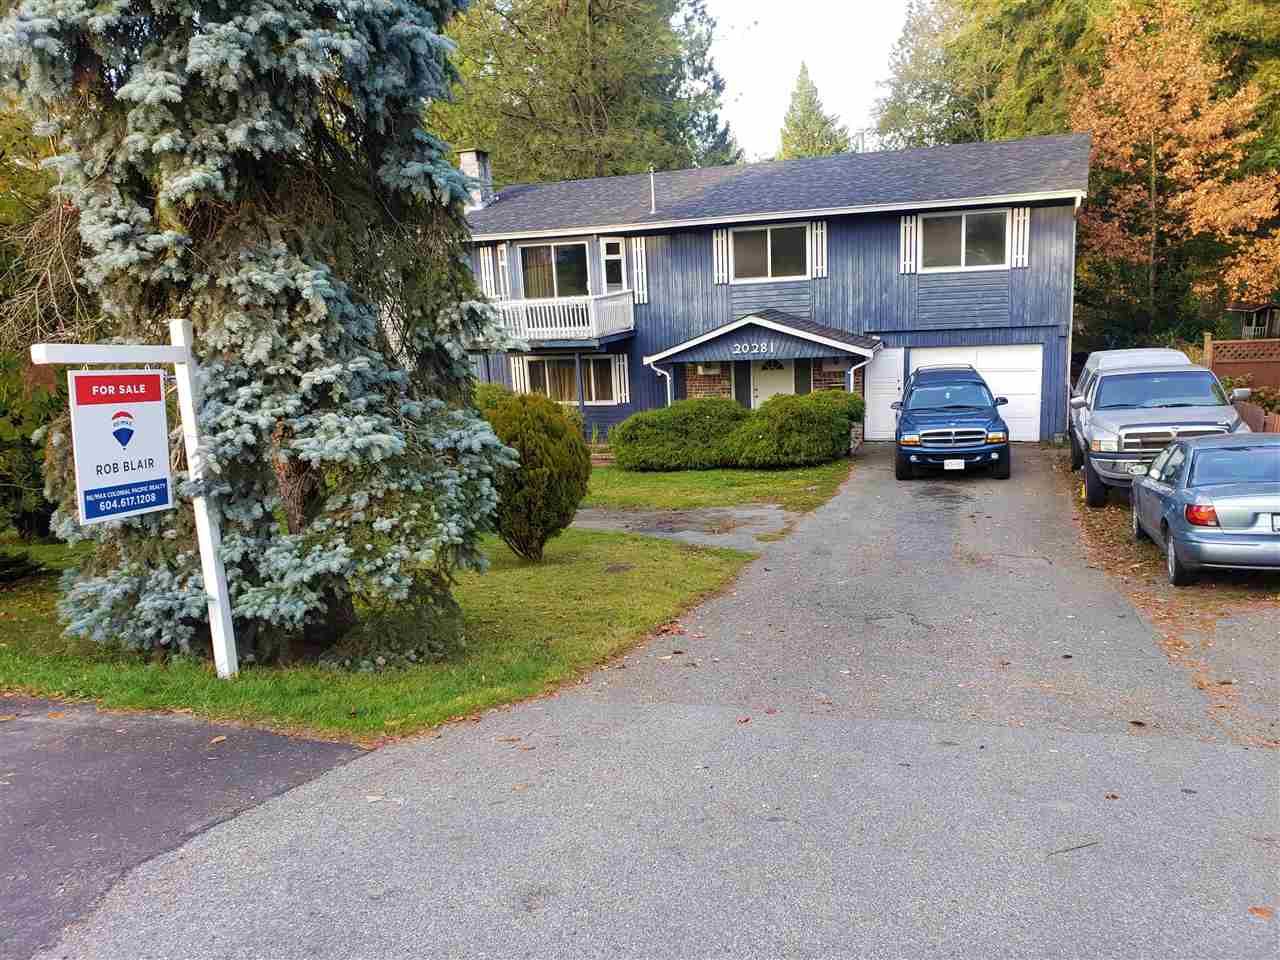 Main Photo: 20281 GRADE Crescent in Langley: Langley City House for sale : MLS®# R2539490